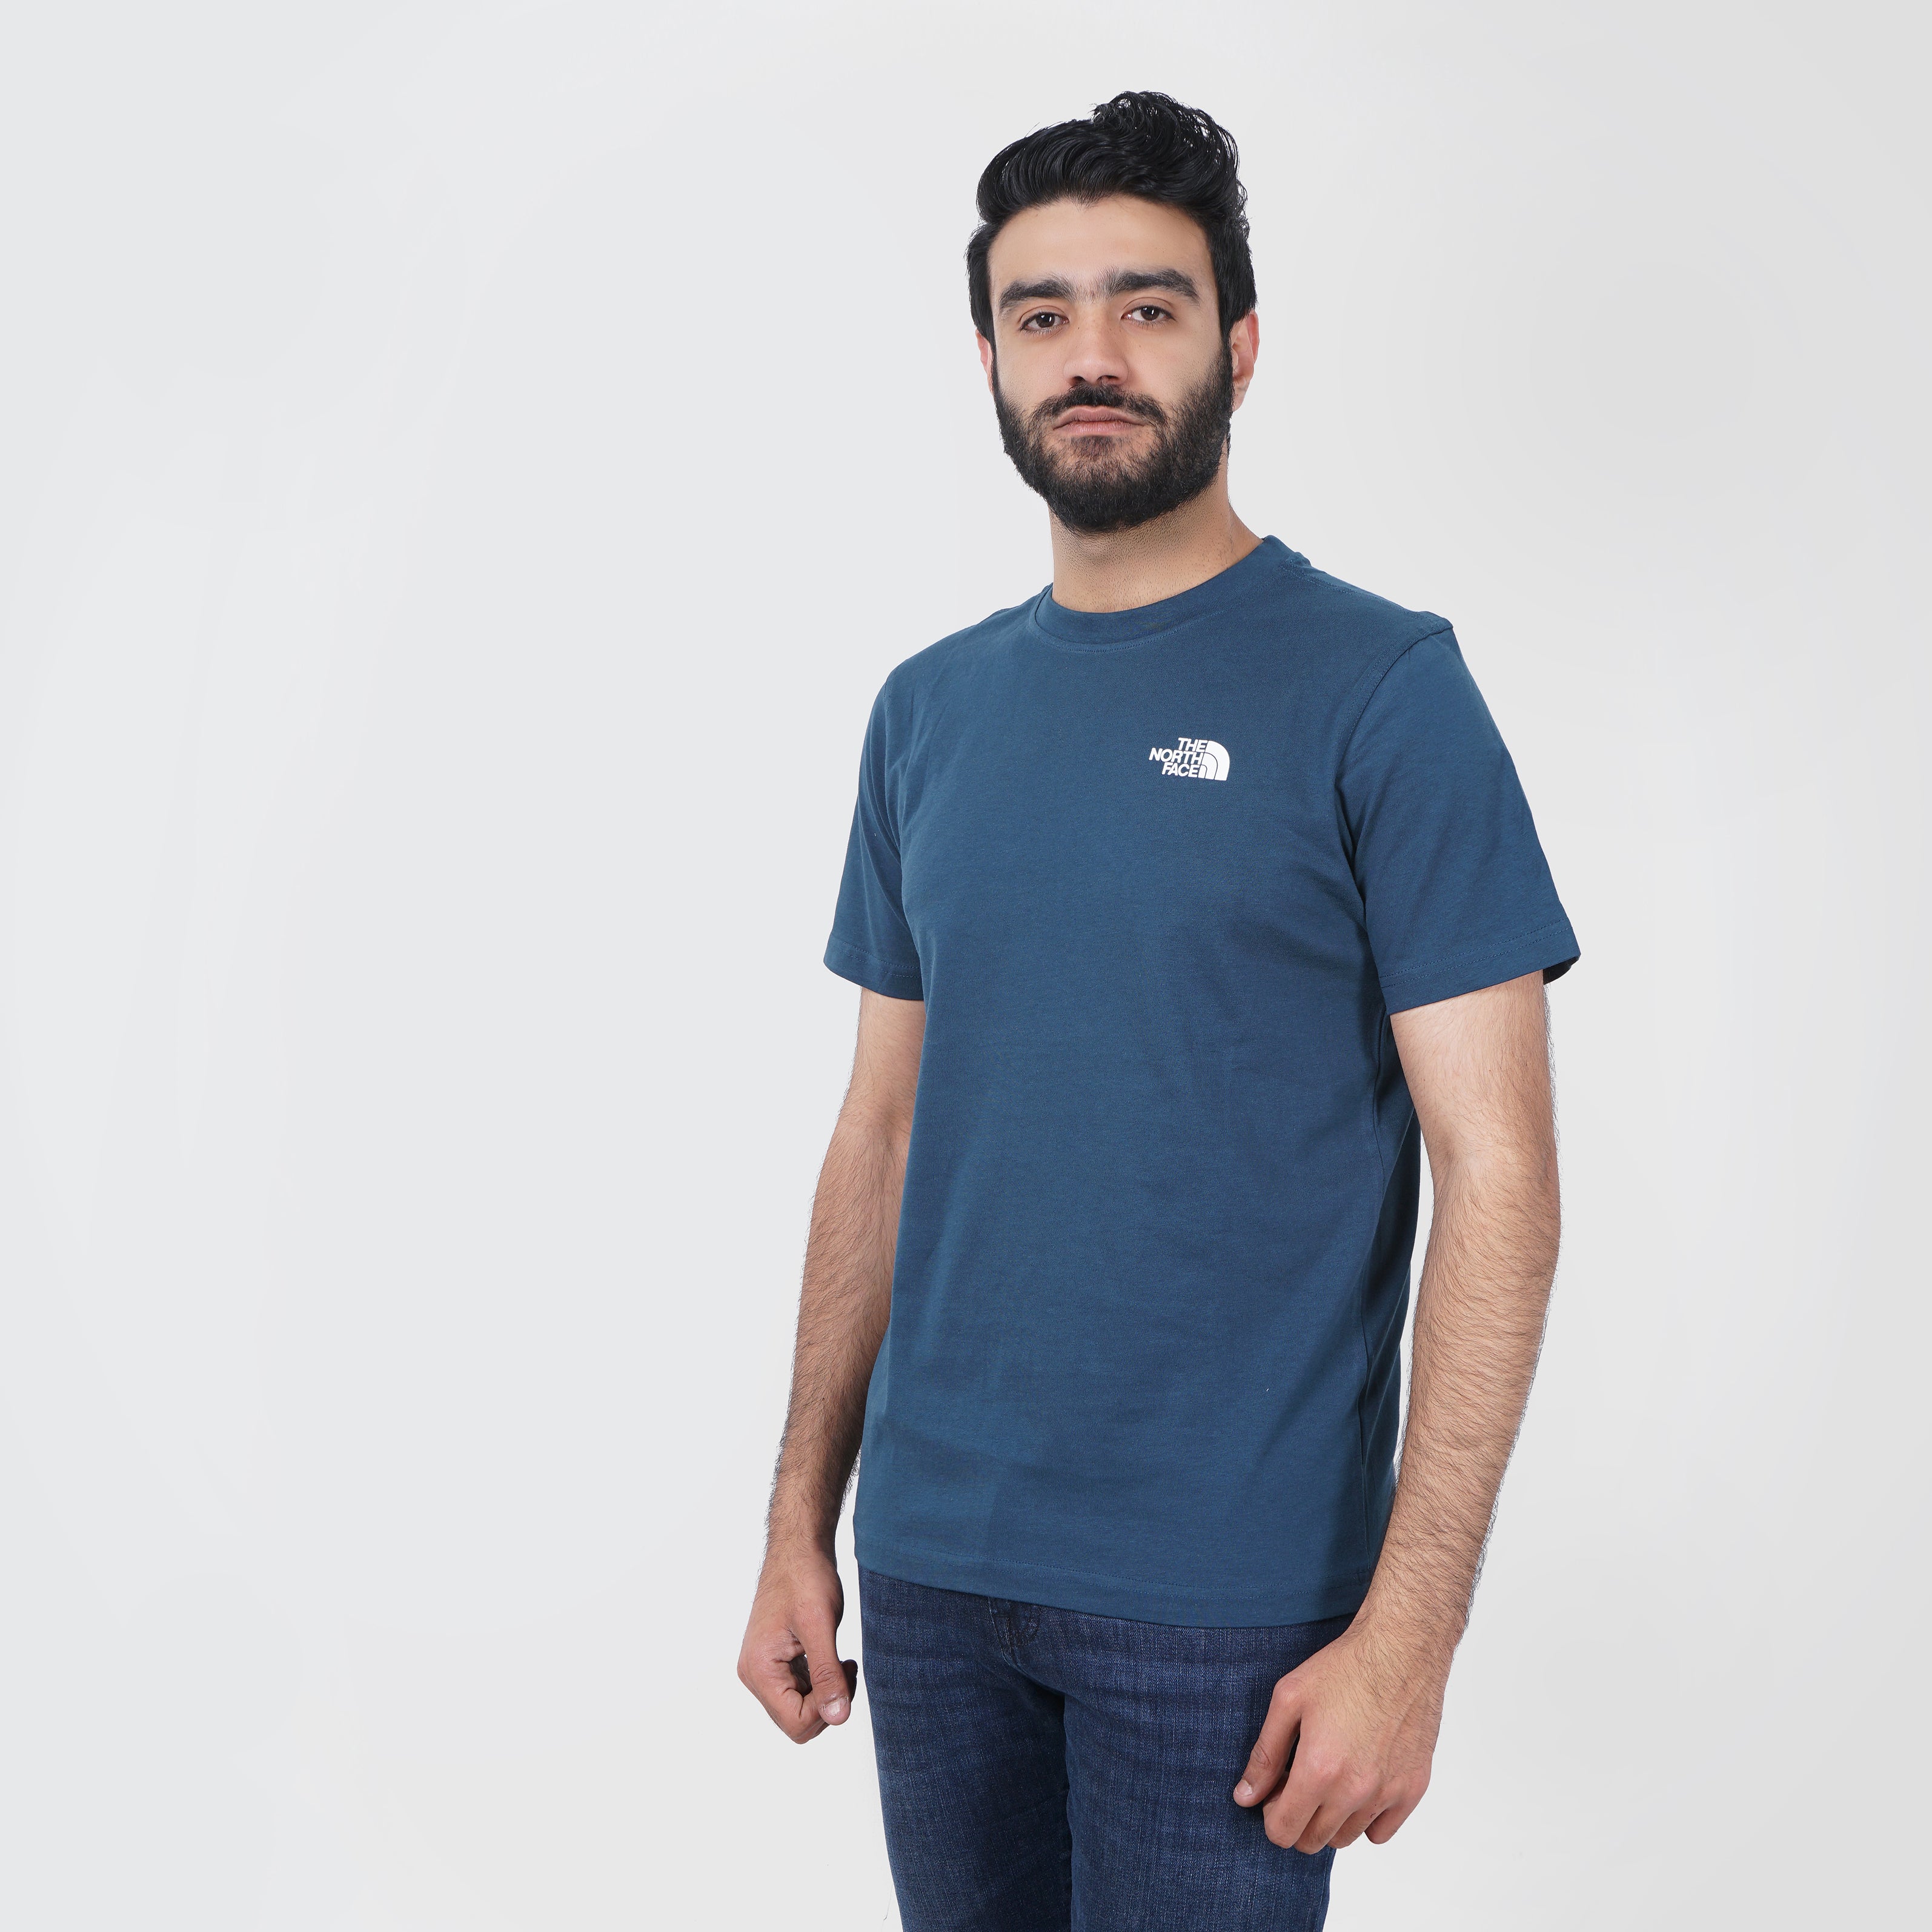 Man in navy blue North Face t-shirt standing against white background.